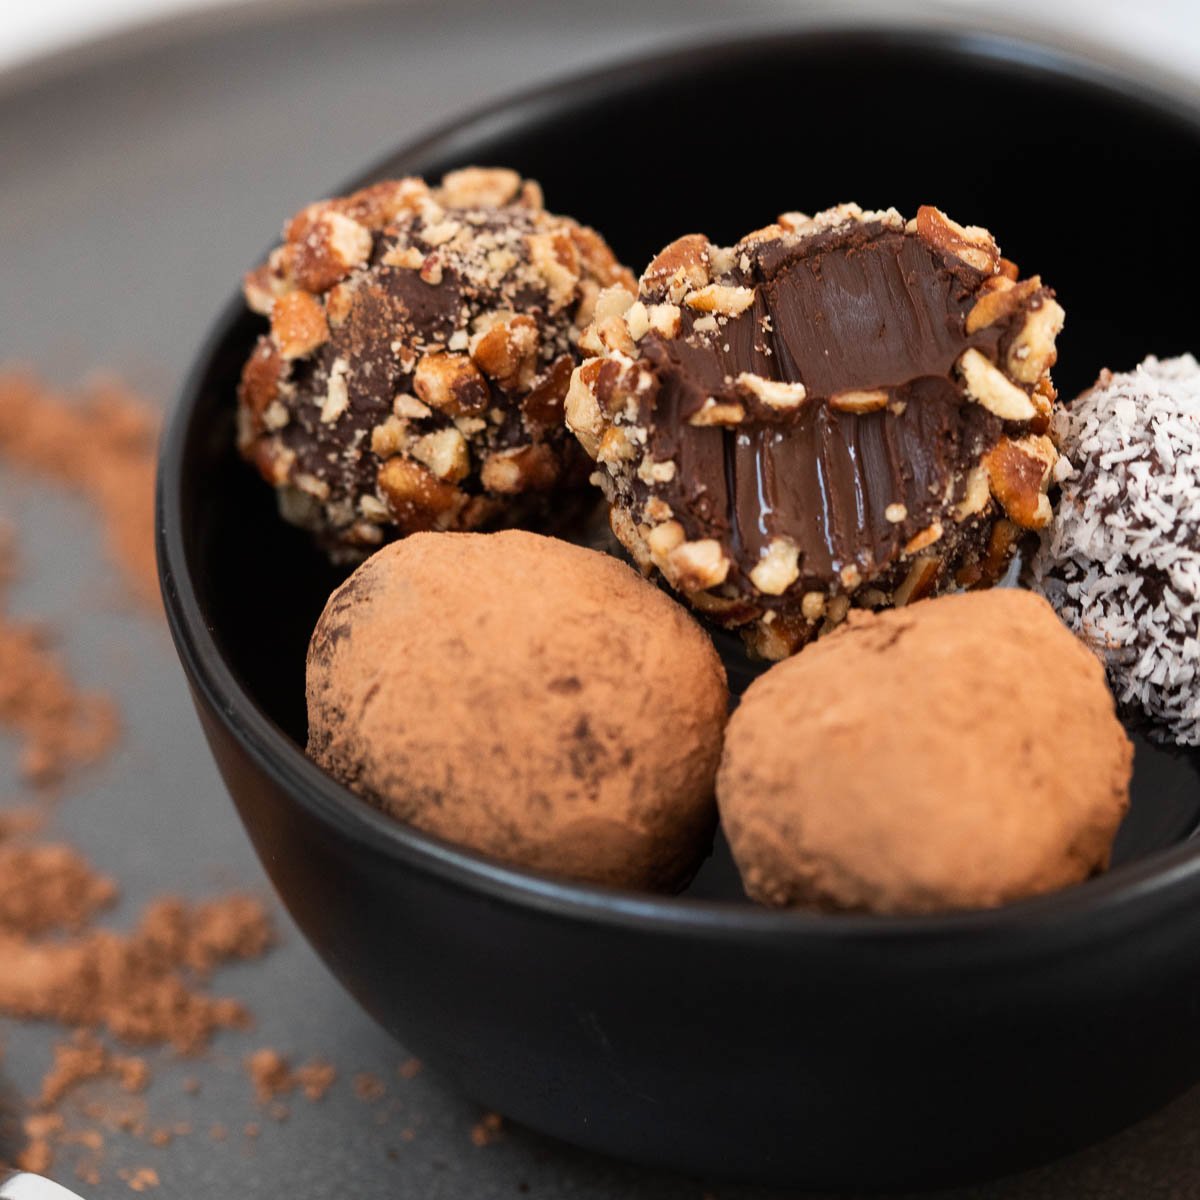 Chocolate vegan truffles coated in nuts, cacao powder, and coconut in small black bowl.